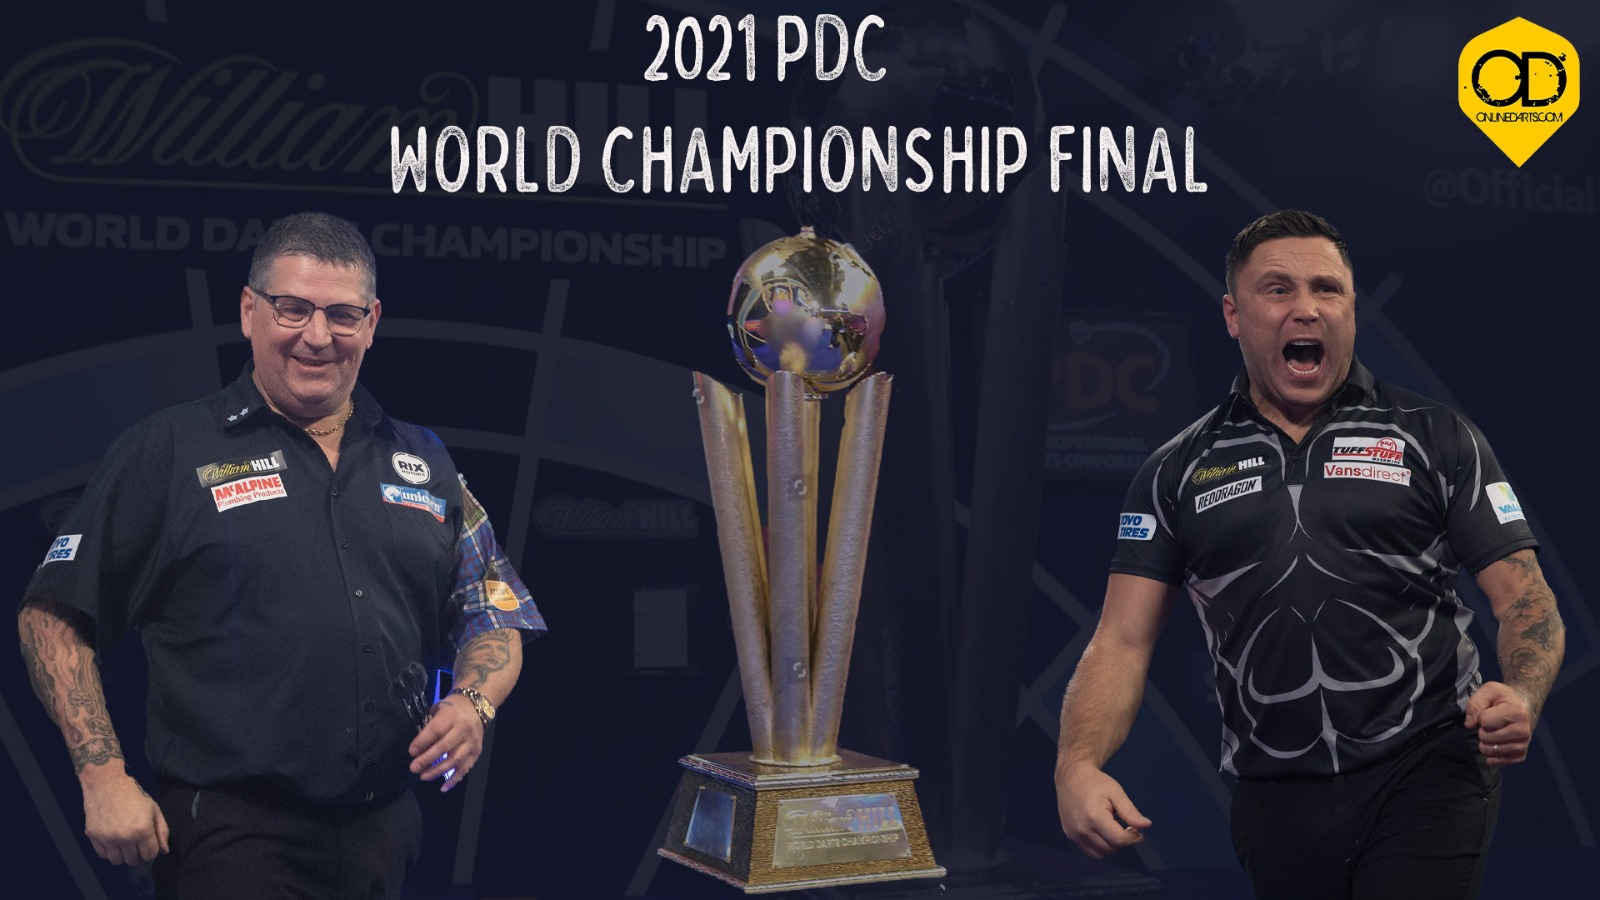 Price and Anderson to meet in World Darts Championship Final